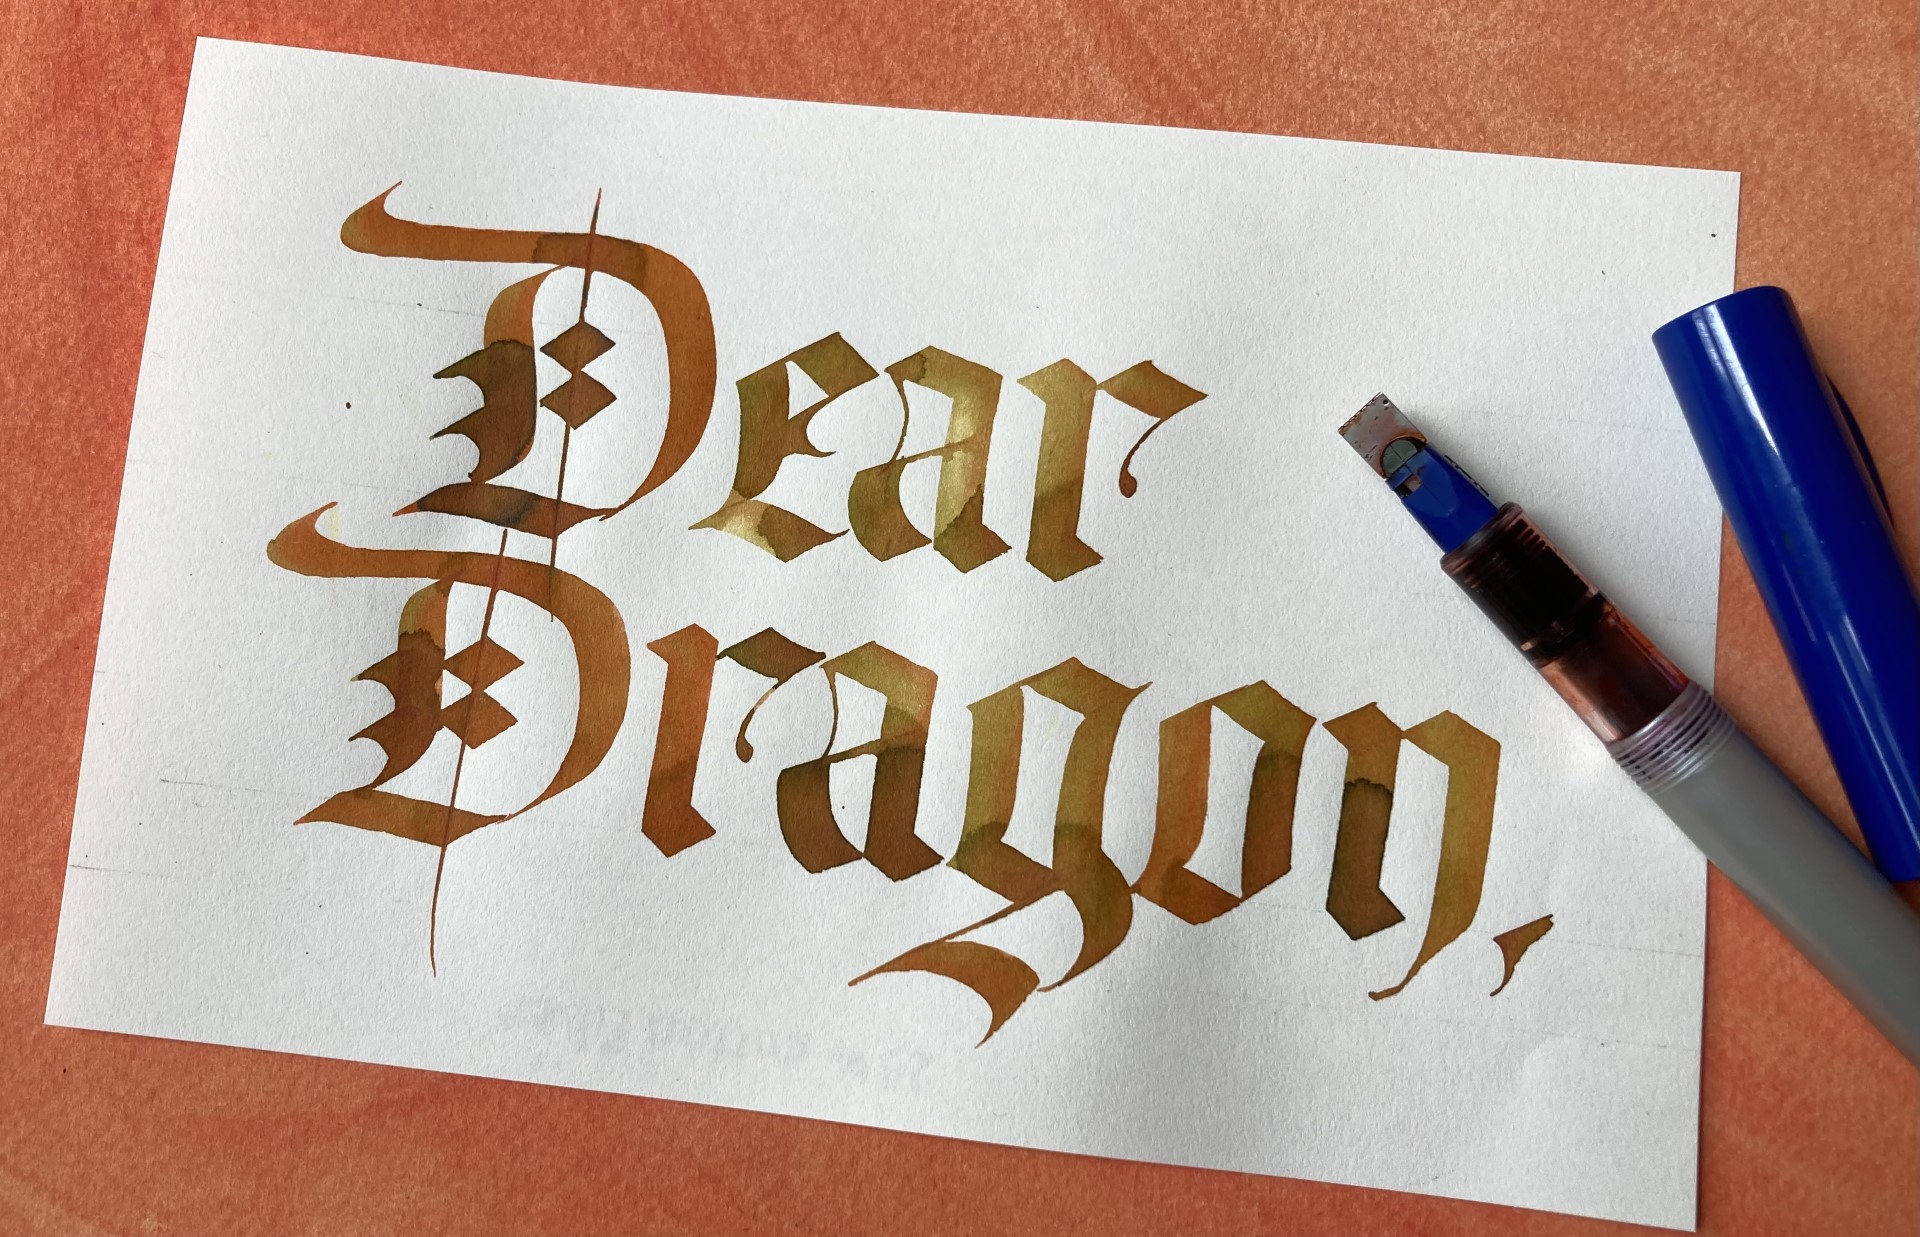 A calligraphy piece with the words Dear Dragon, written on a piece of paper with a broad edge nib pen next to it.